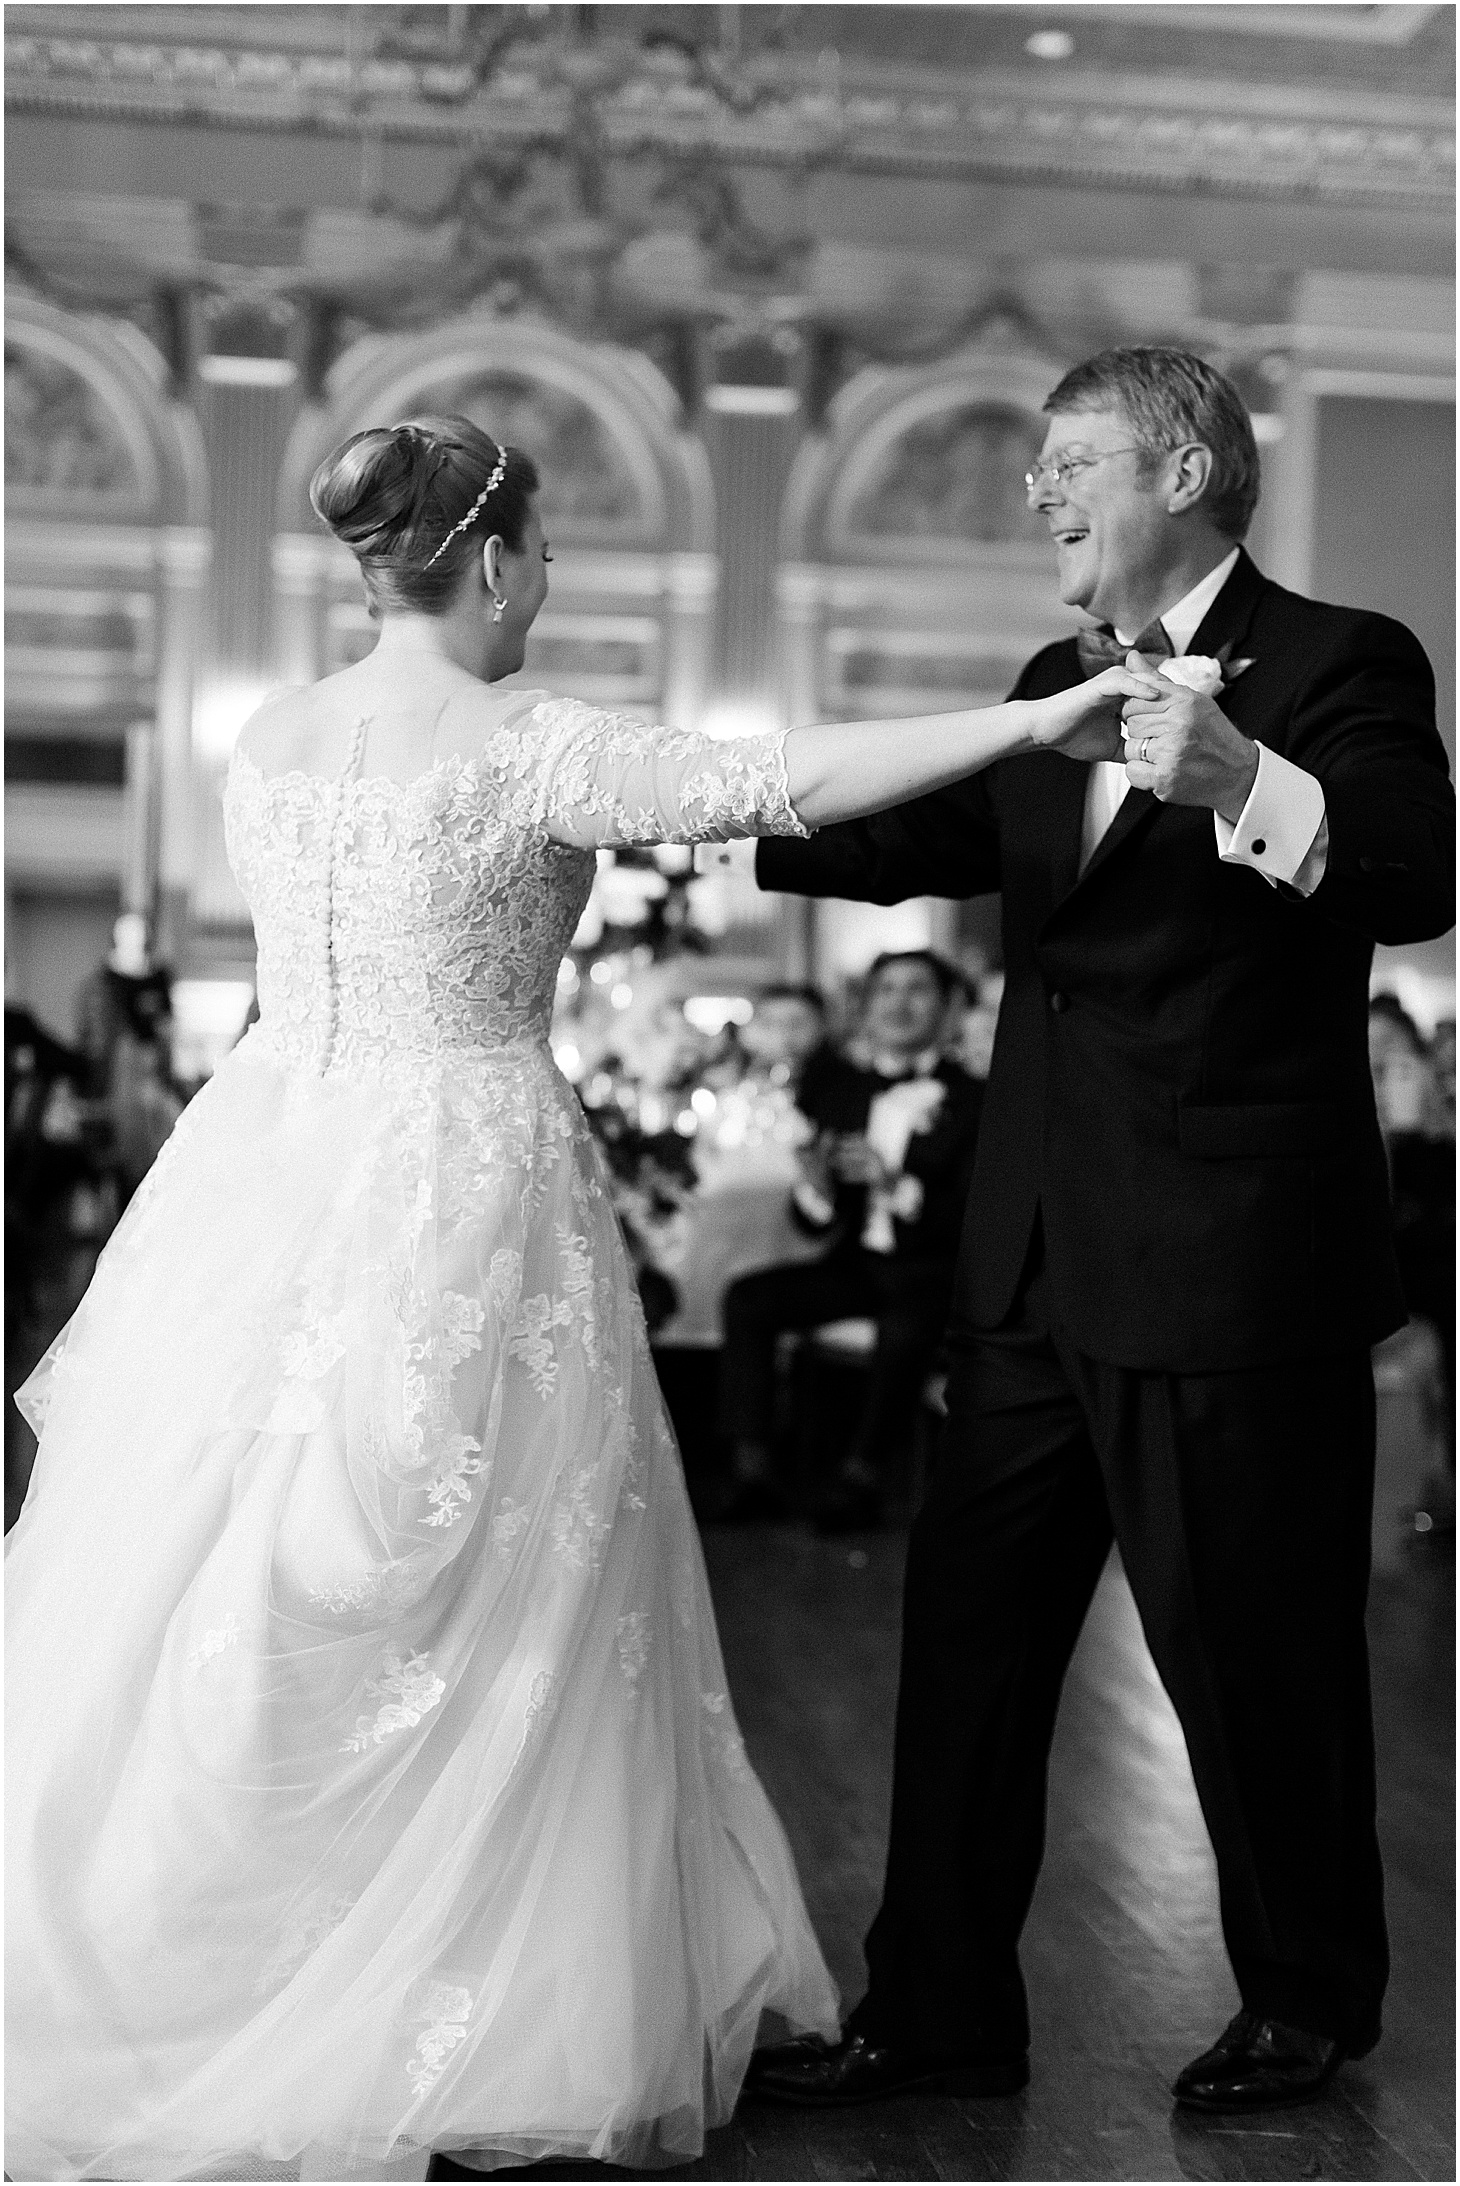 Father-Daughter Dance at Commonwealth Club Wedding Reception in Richmond, VA, Wedding Ceremony at Grace and Holy Trinity Episcopal Church, Burgundy and Blush Christmas Wedding at Richmond’s Commonwealth Club, Sarah Bradshaw Photography